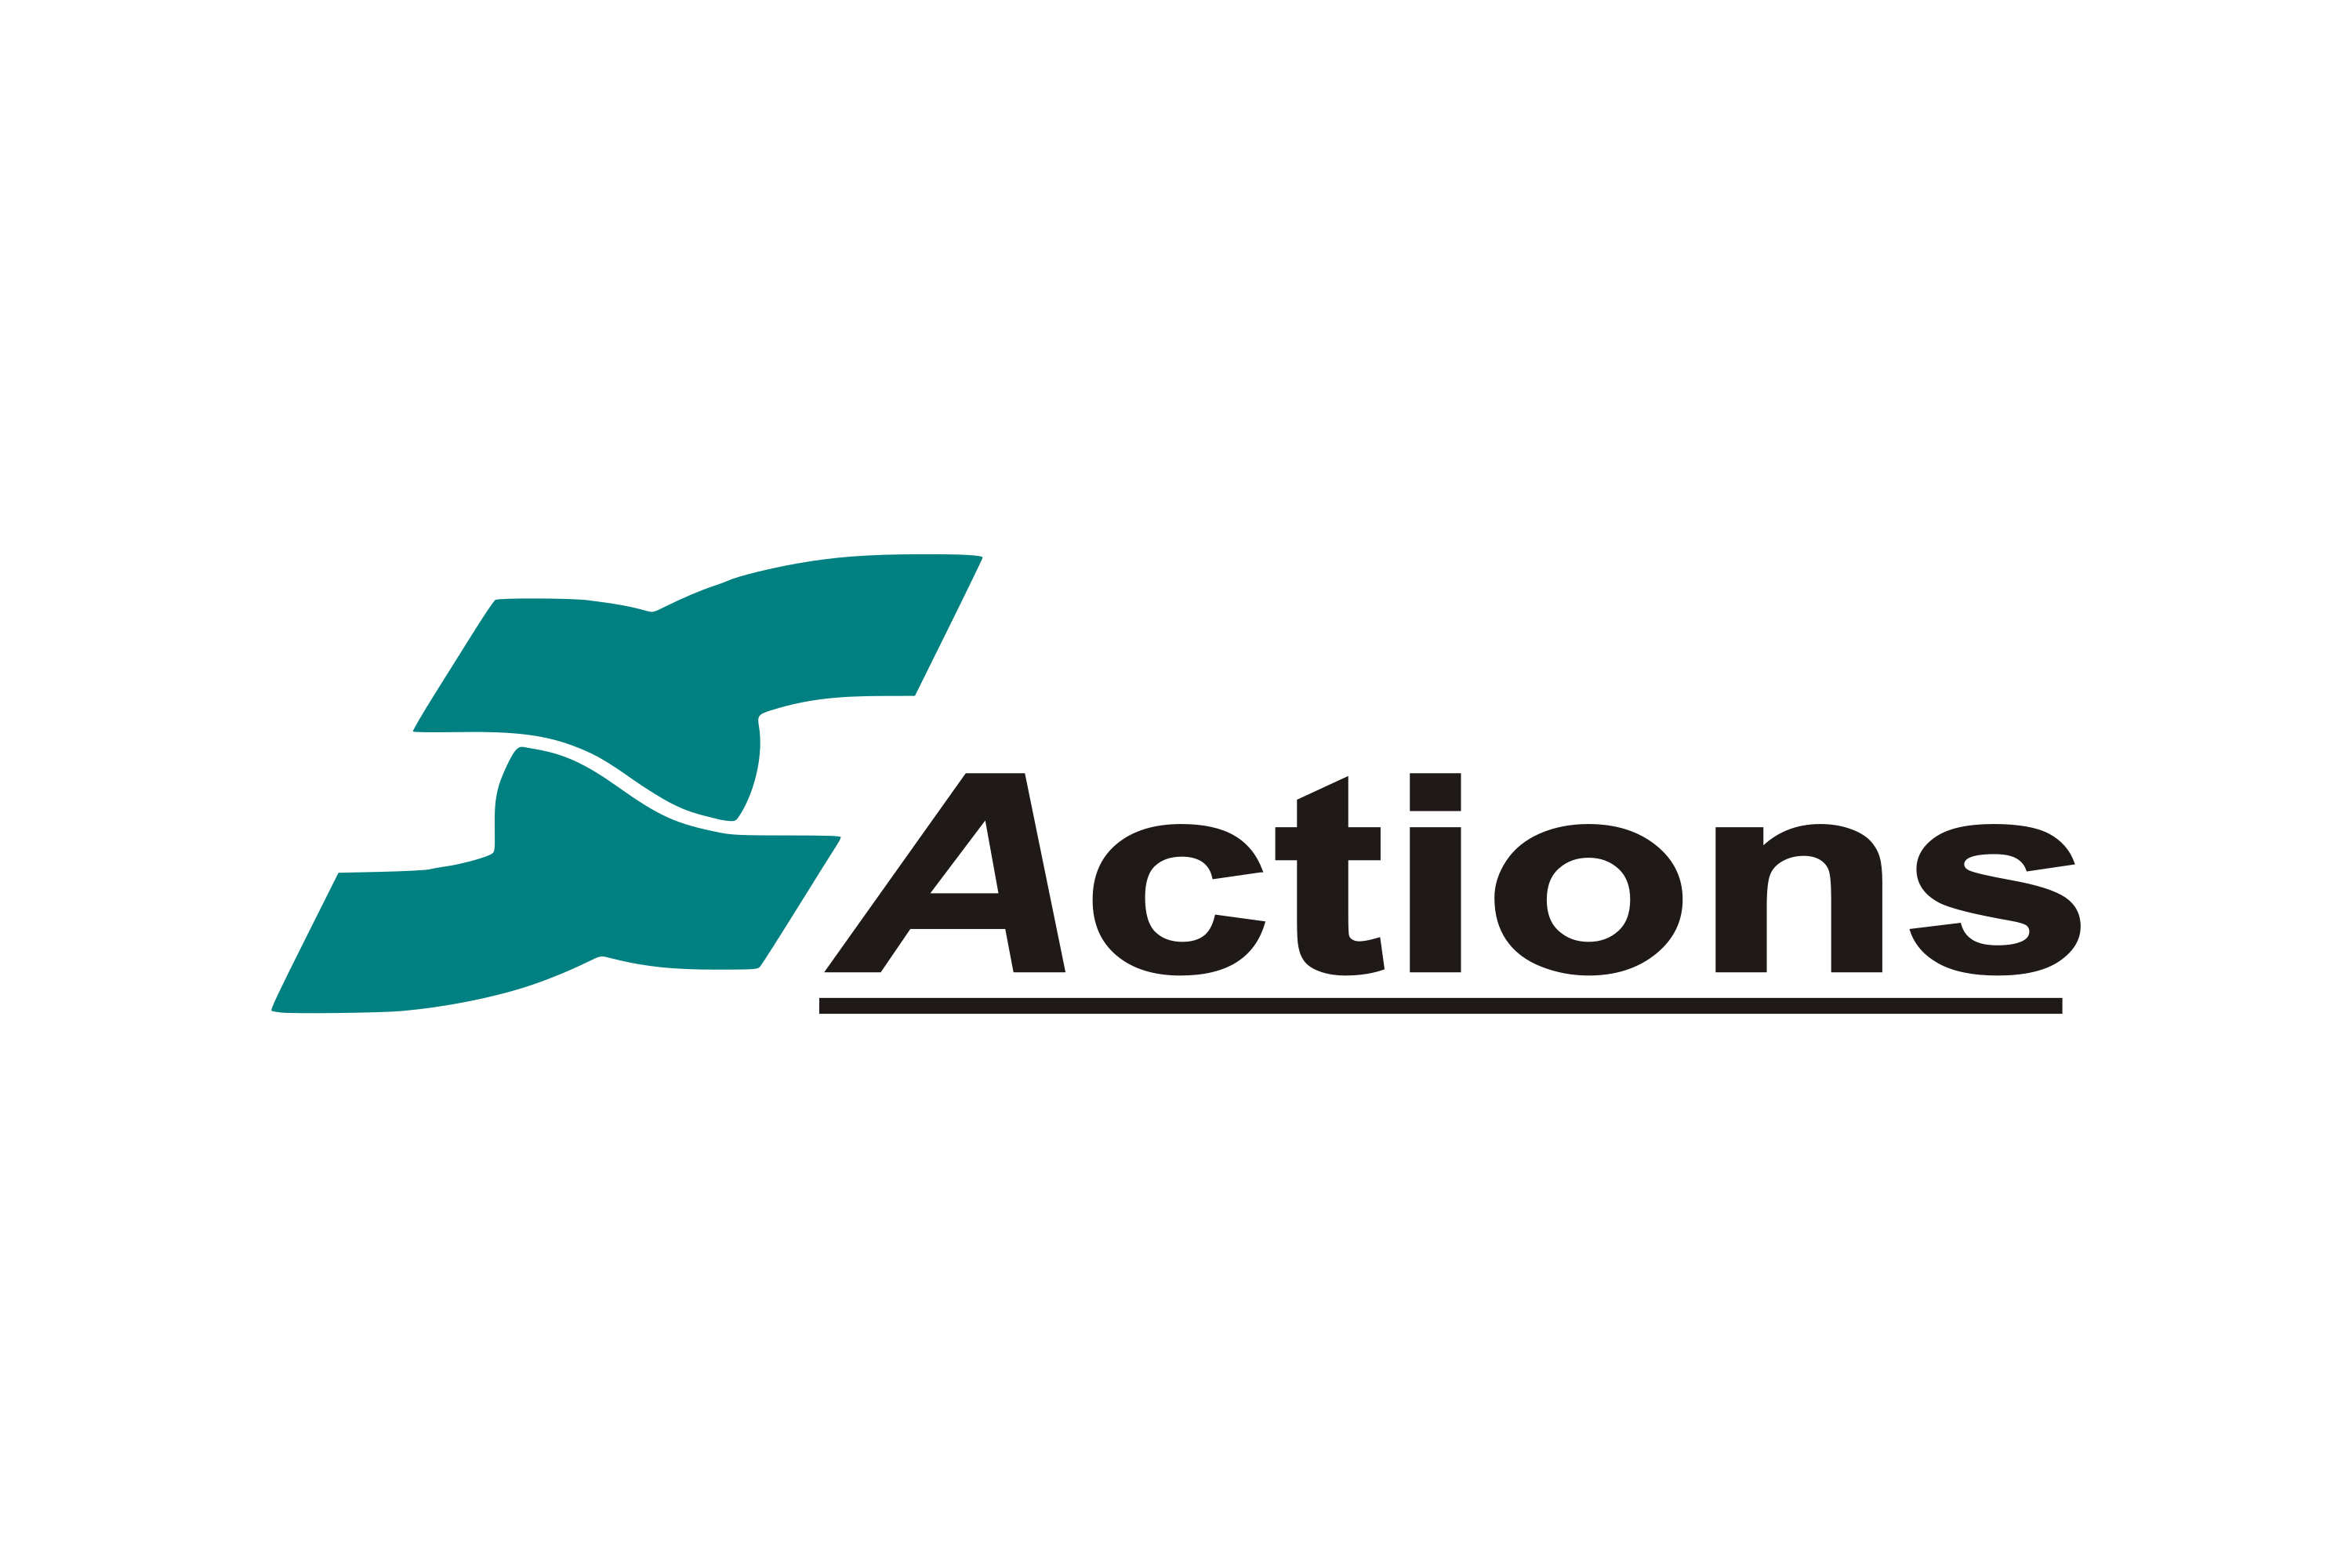 Download Actions Semiconductor Logo in SVG Vector or PNG File Format